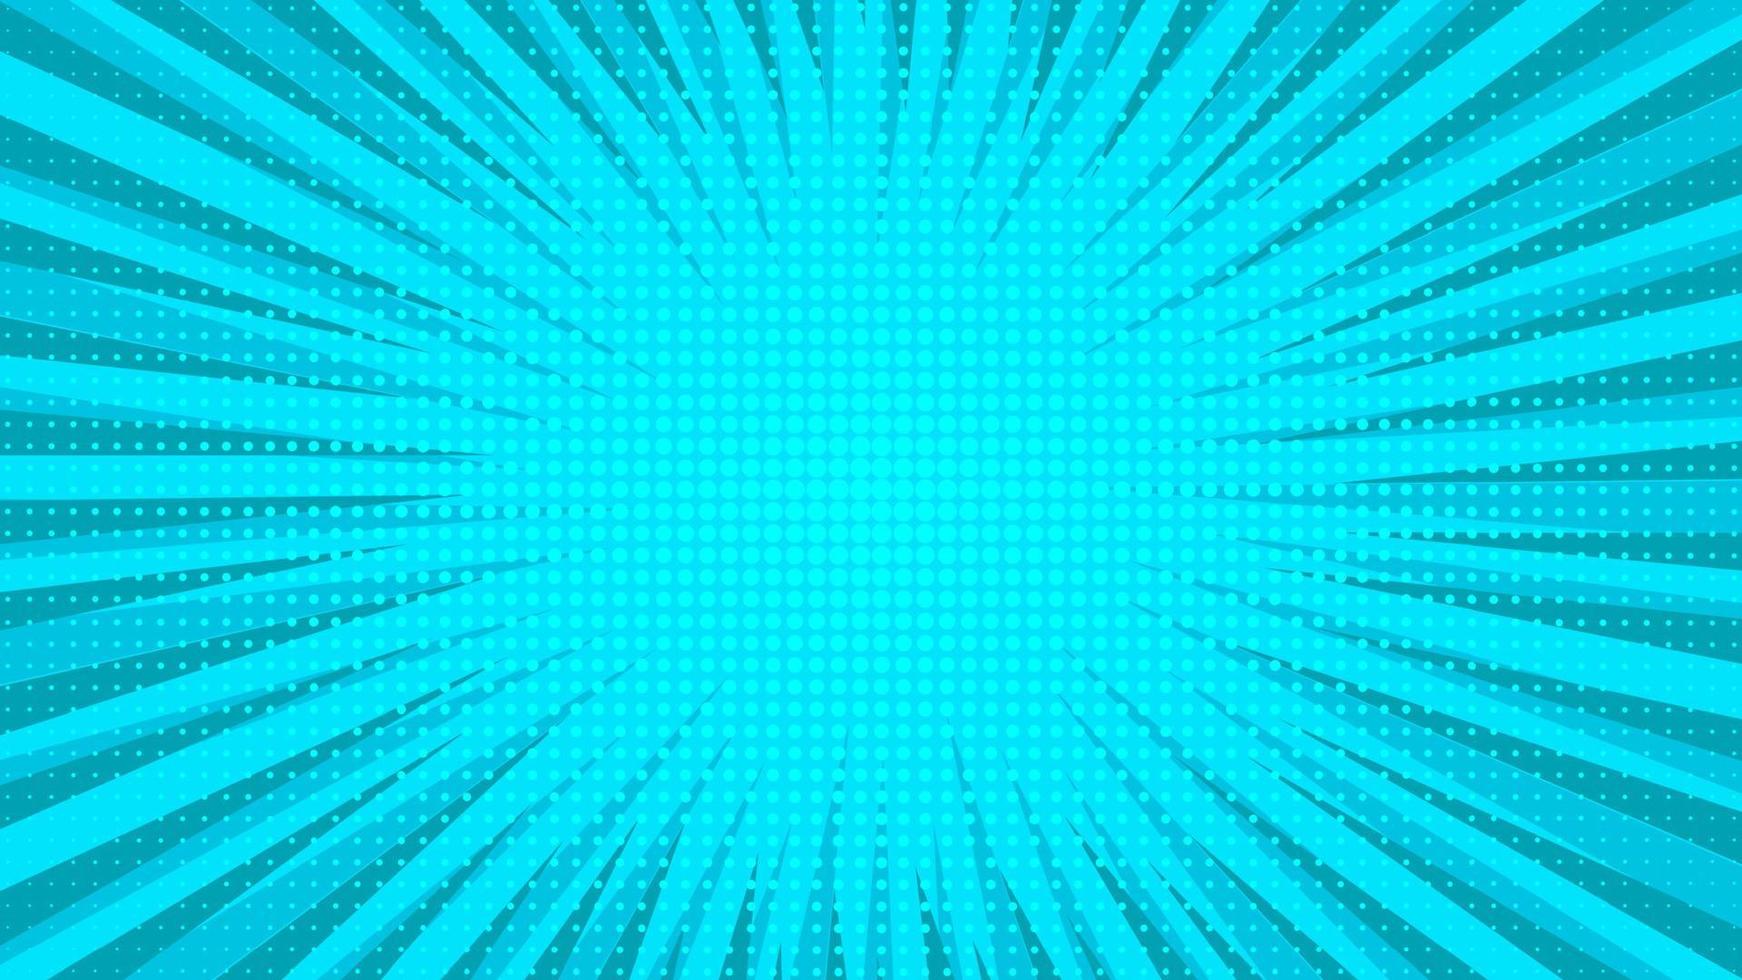 Blue comic book page background in pop art style with empty space. Template with rays, dots and halftone effect texture. Vector illustration